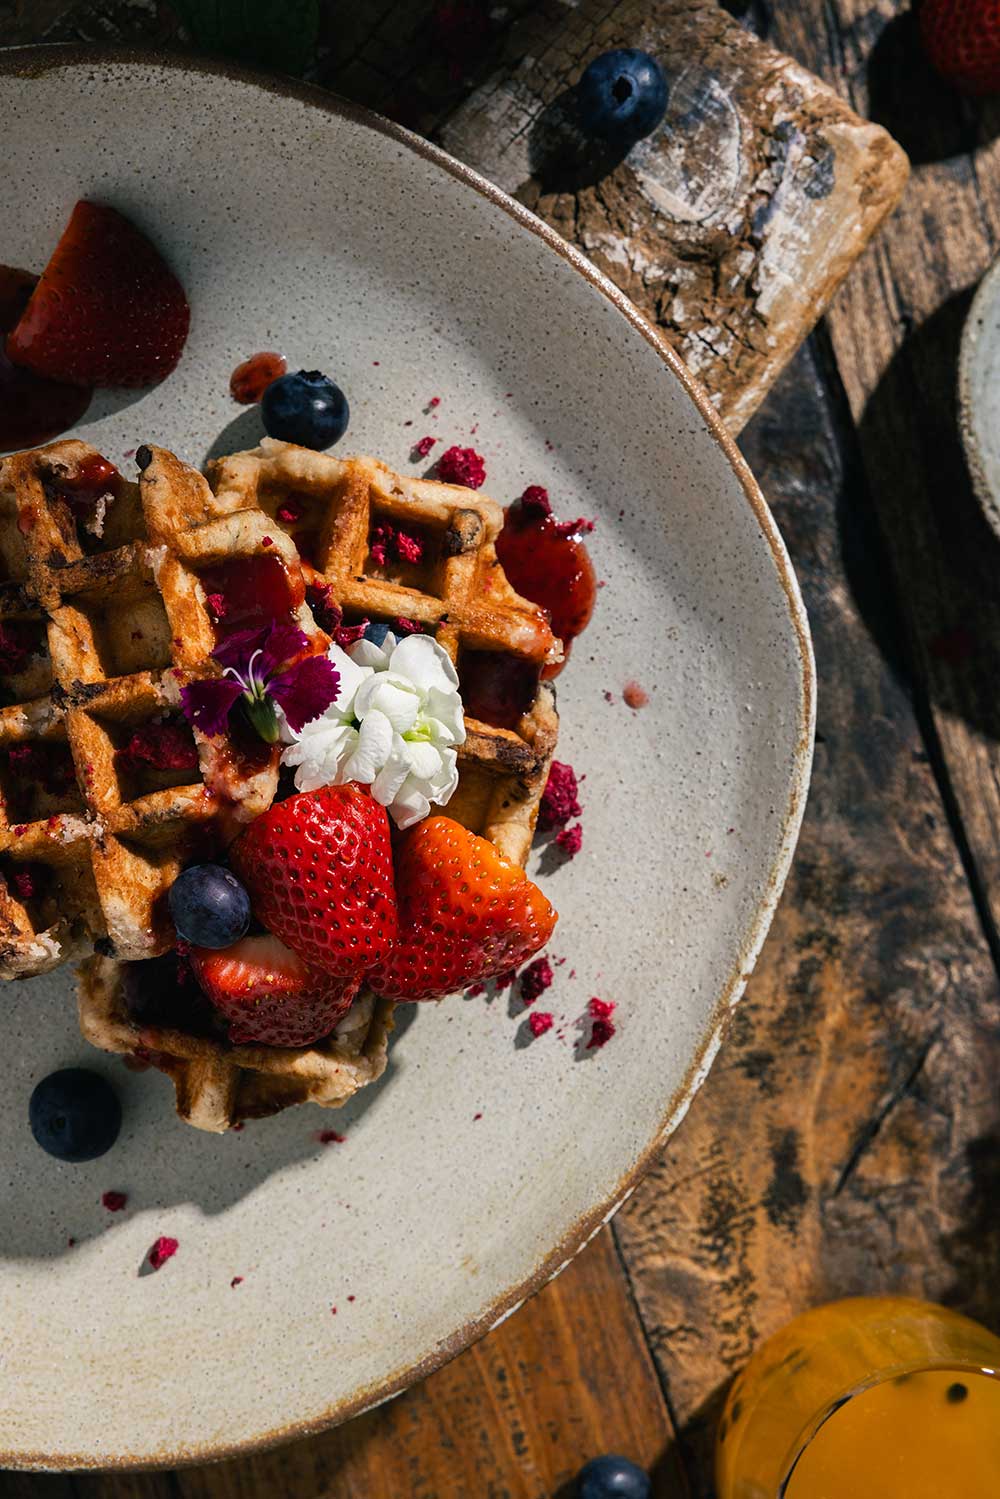 Image of waffles with fruit by Reuben Looi